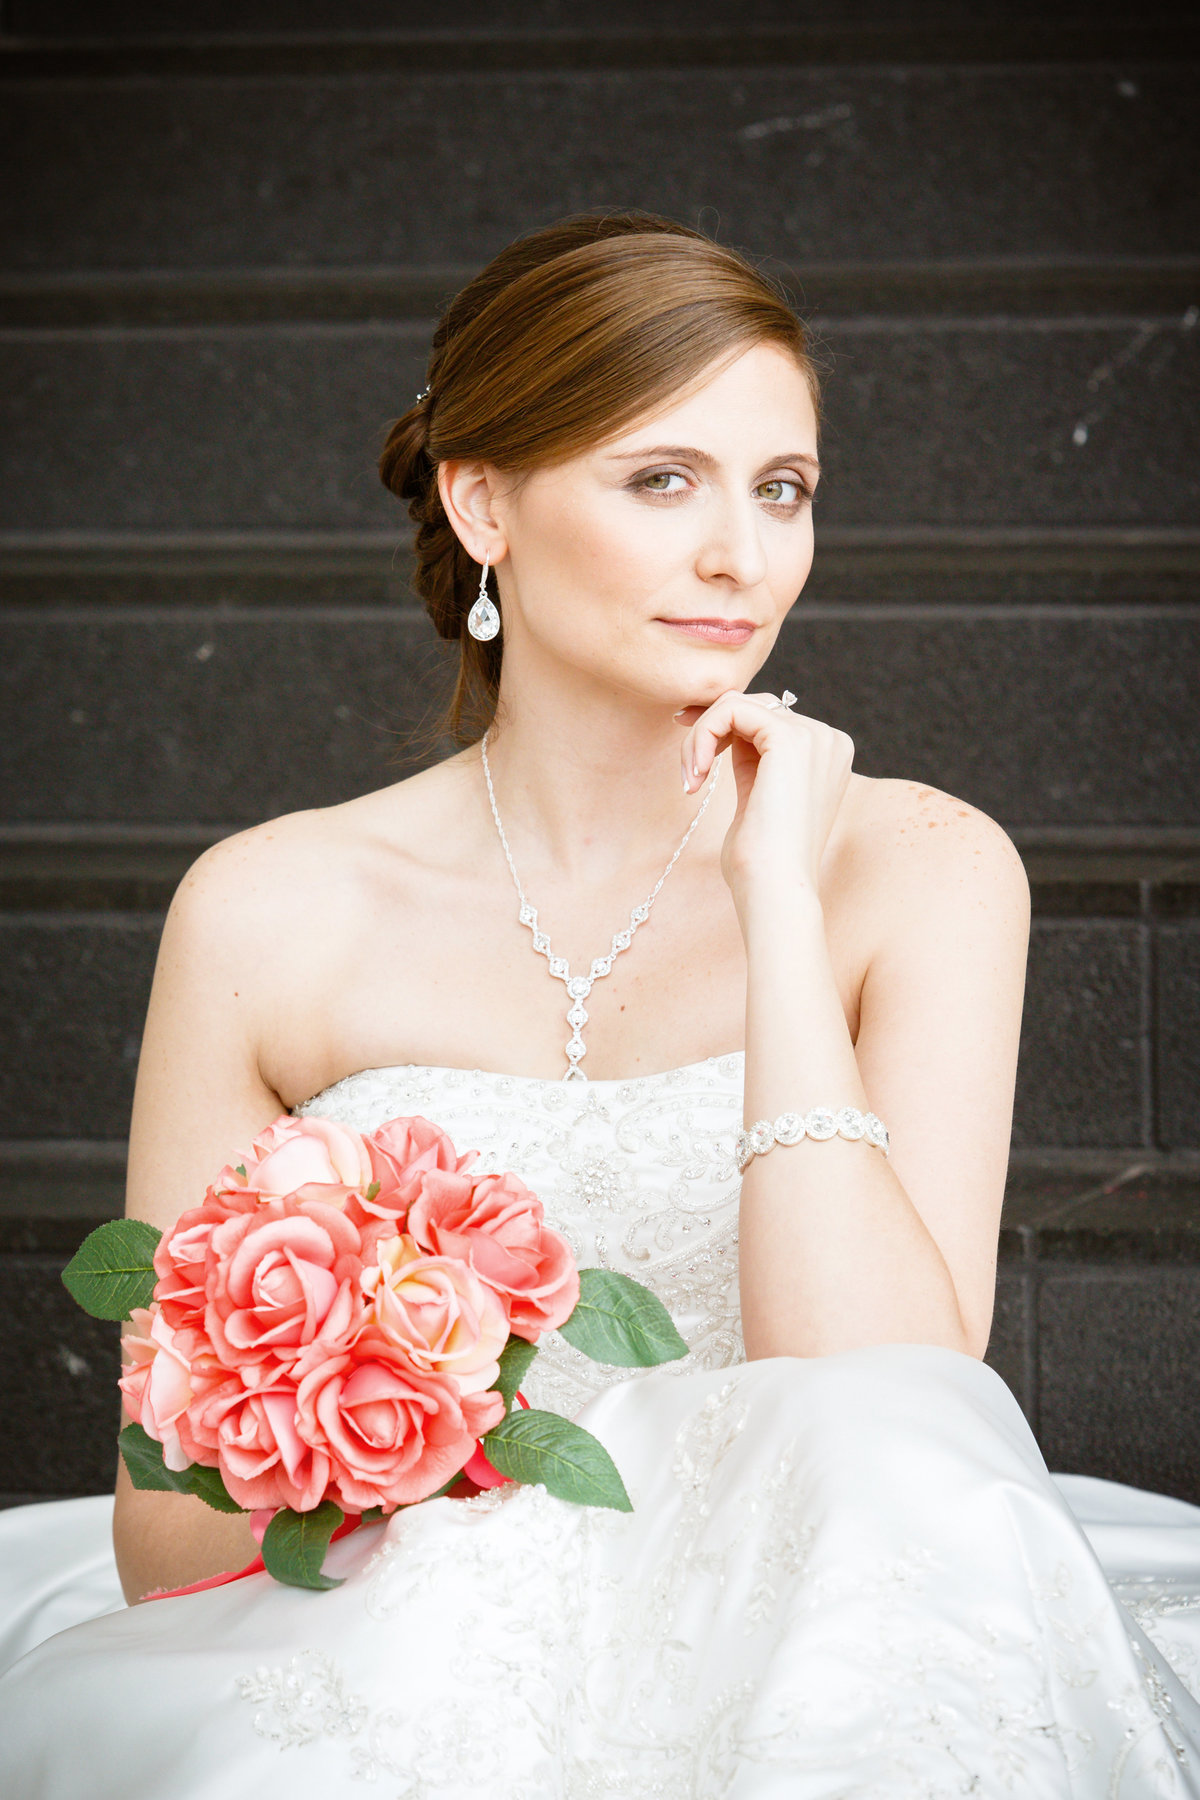 Stephanie Ferro bridal photo at The Battle House hotel in Mobile, Alabama.